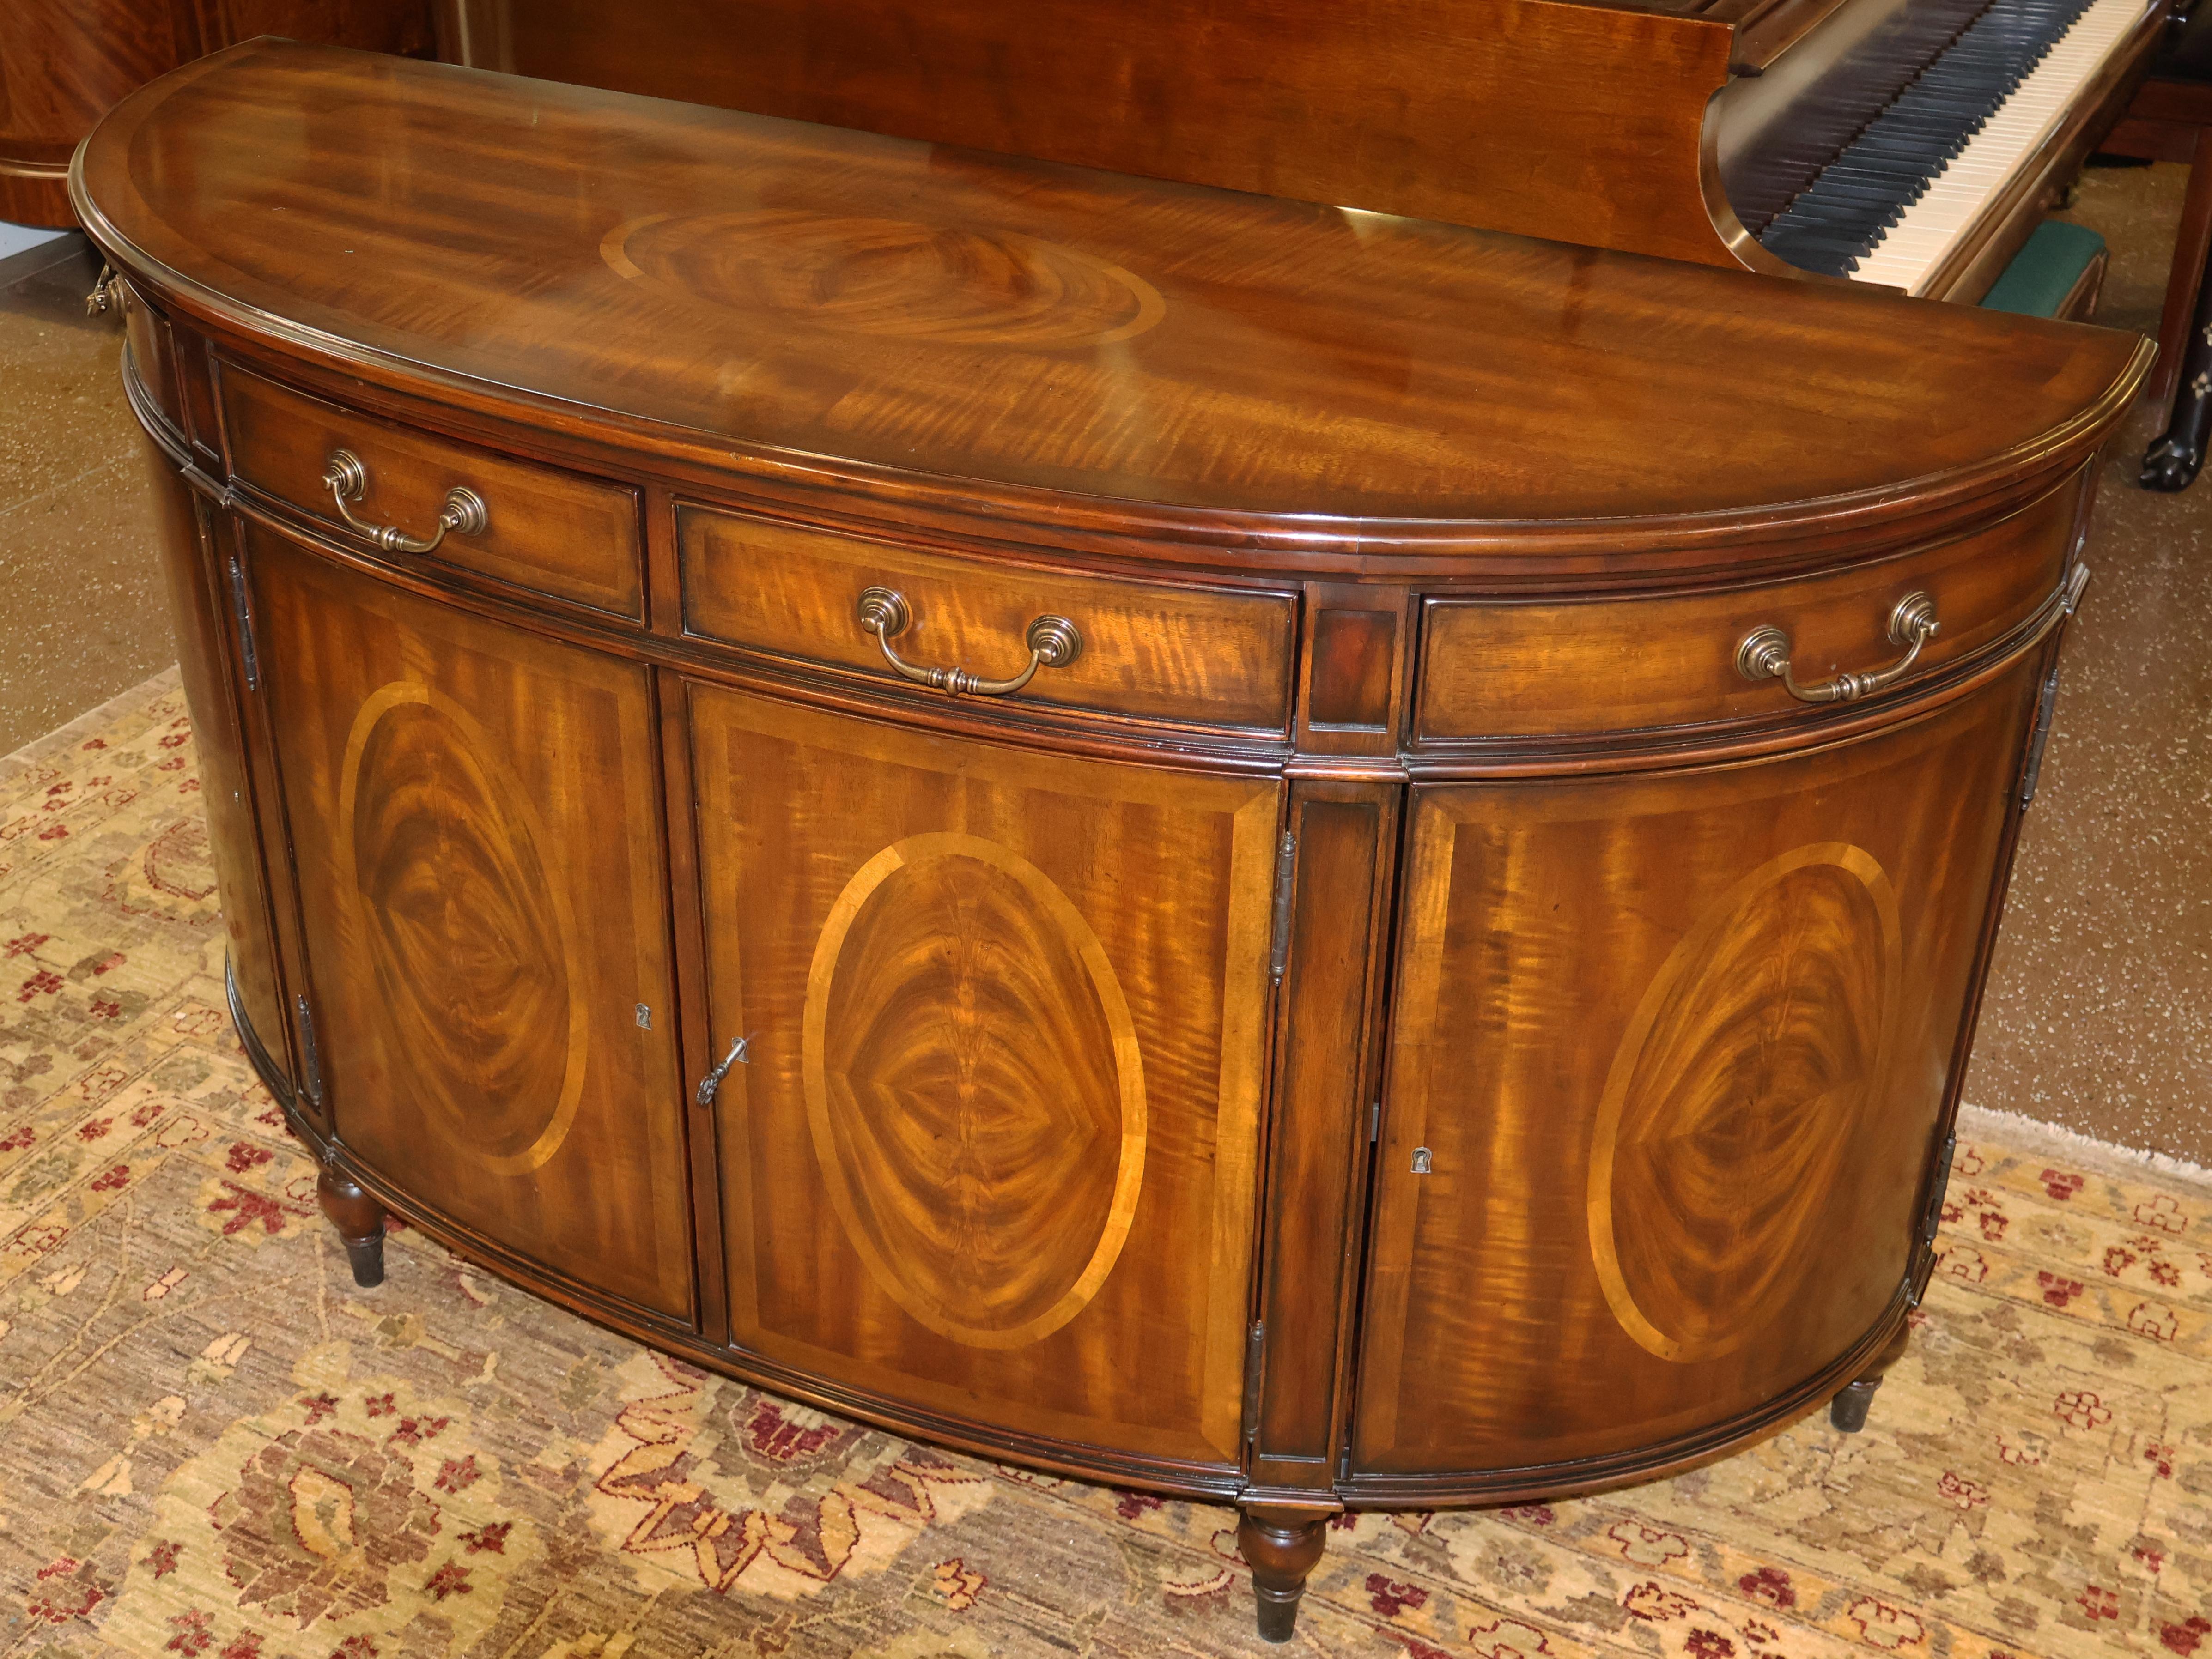 Theodore Alexander Flame Mahogany Demilune Regency Style Buffet Server Sideboard

Dimensions : 60